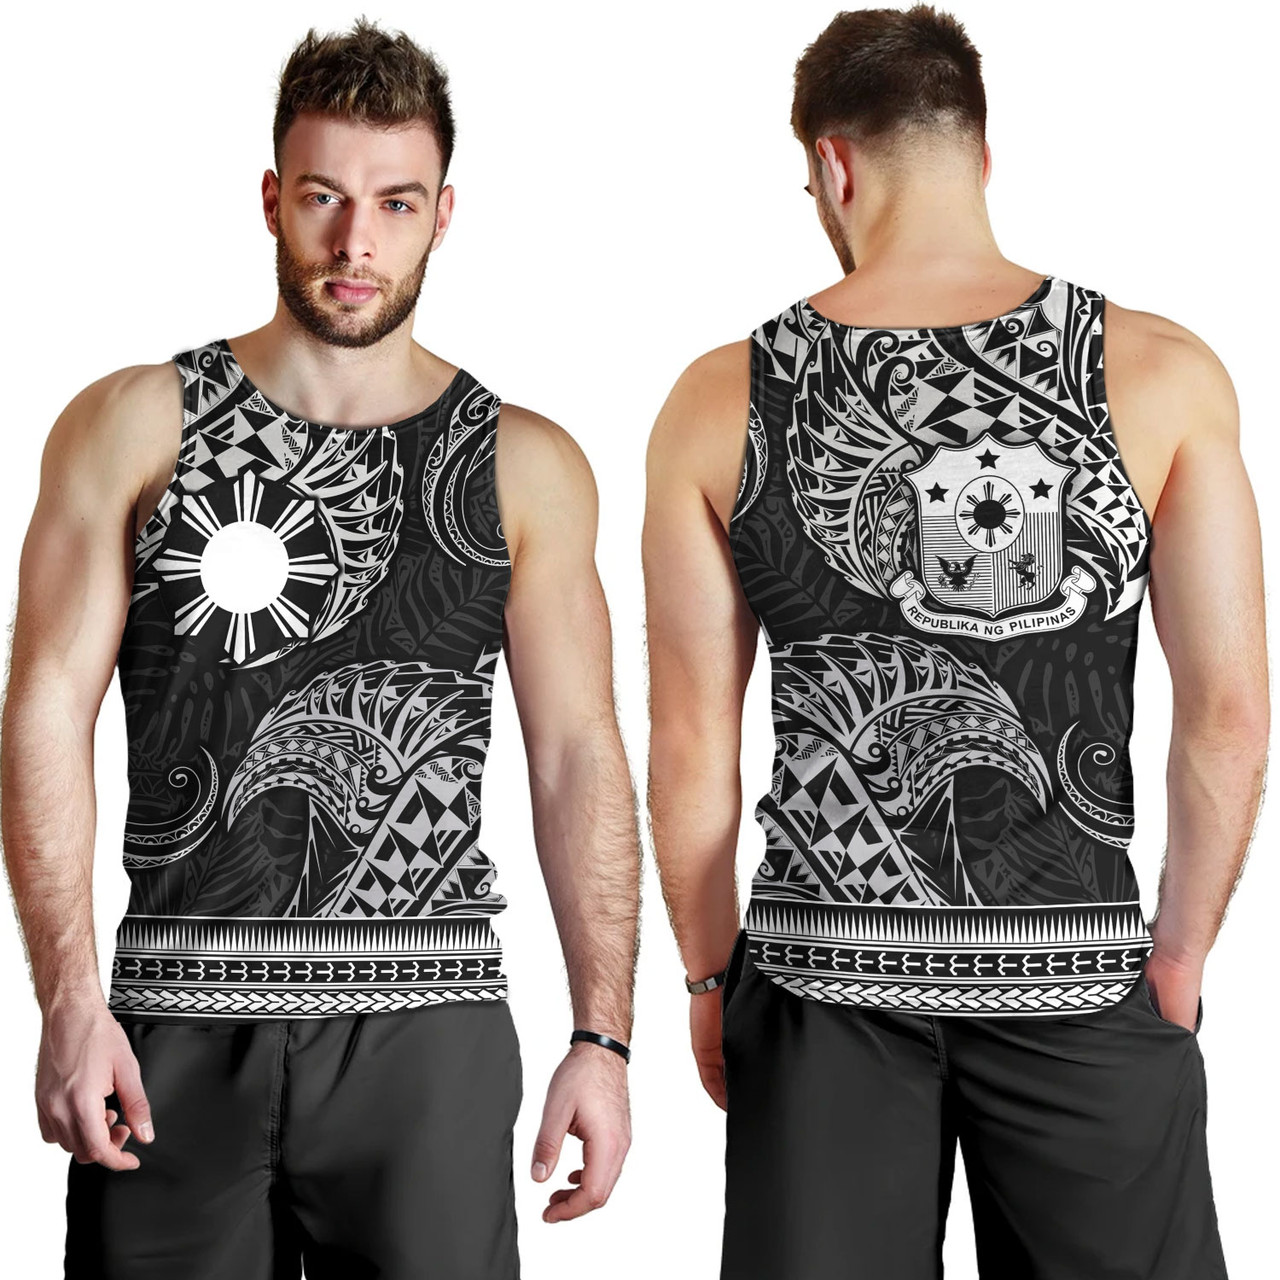 Philippines Filipinos Tank Top Filipino Coat Of Arms With Leaves and Tribal Patterns